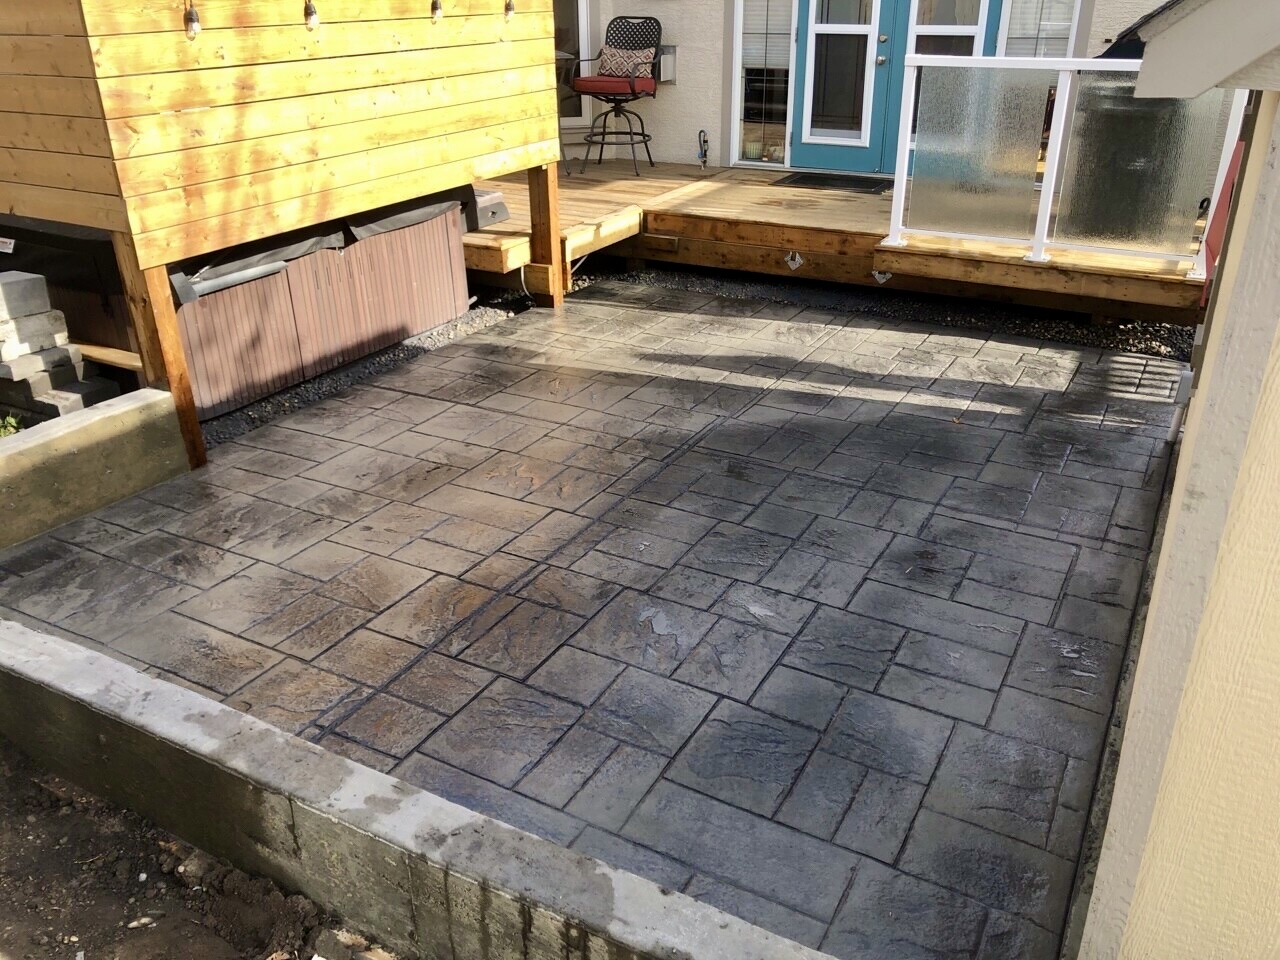 Stamped concrete patio